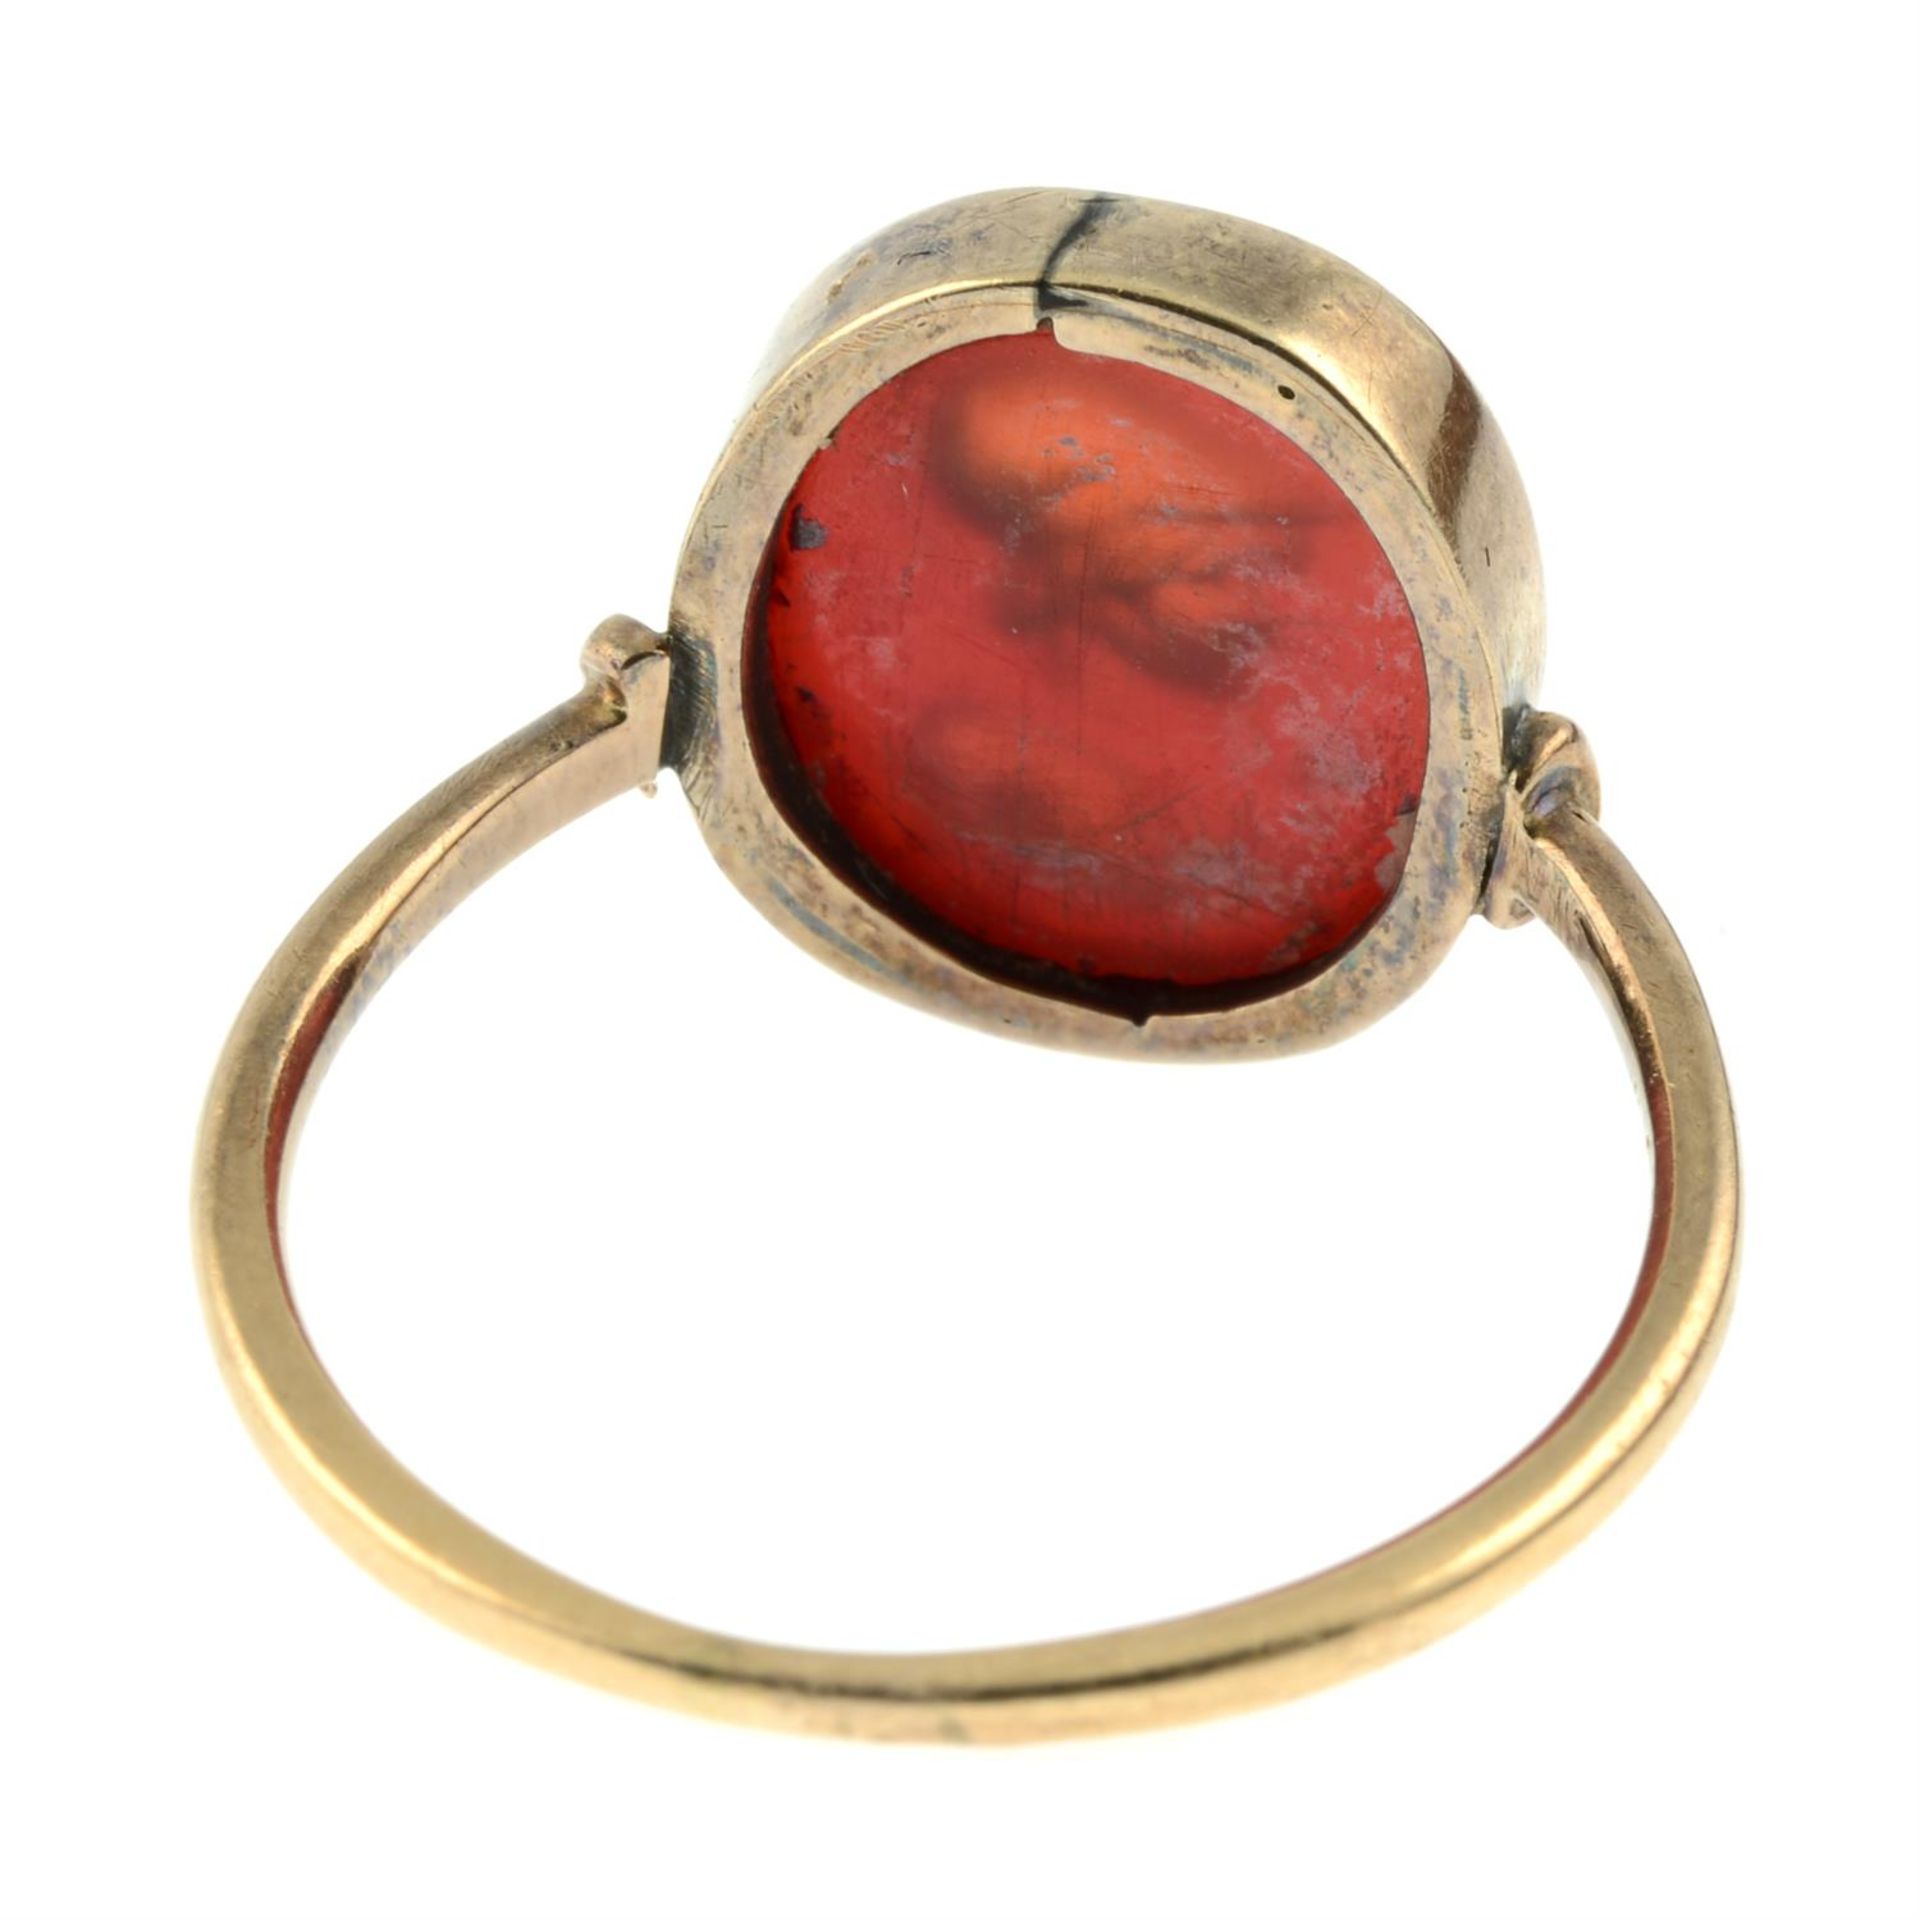 A 19th century gold carnelian intaglio ring, carved to depict Athena with owl attribute. - Bild 4 aus 5